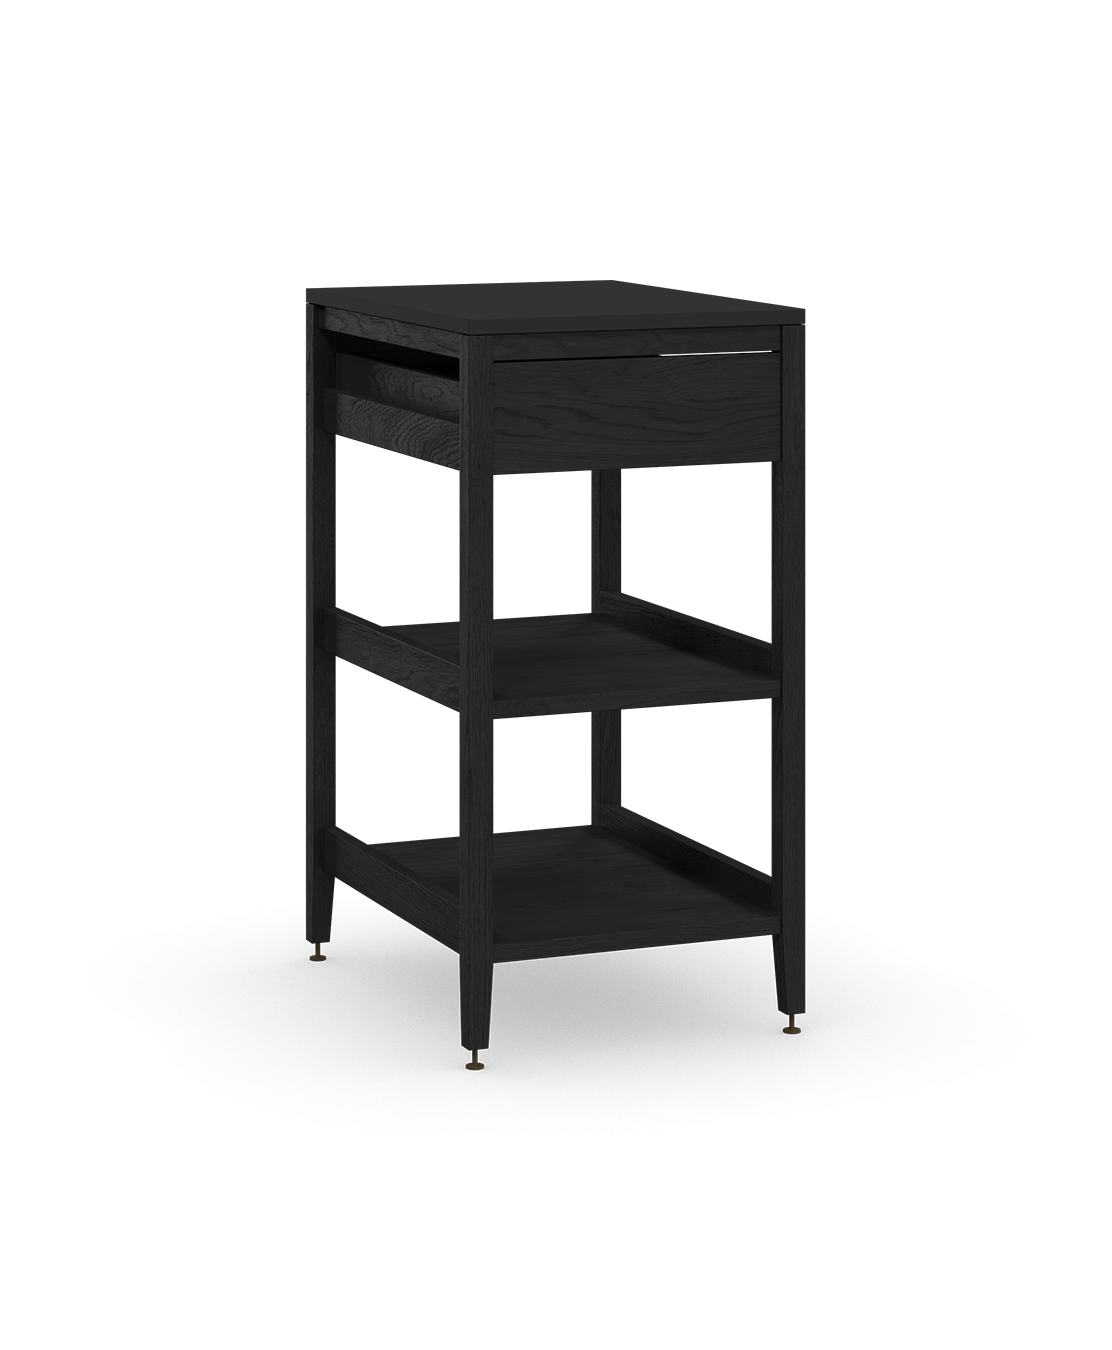 Coquo modular kitchen cabinet with one drawer and two shelves in black stained oak.